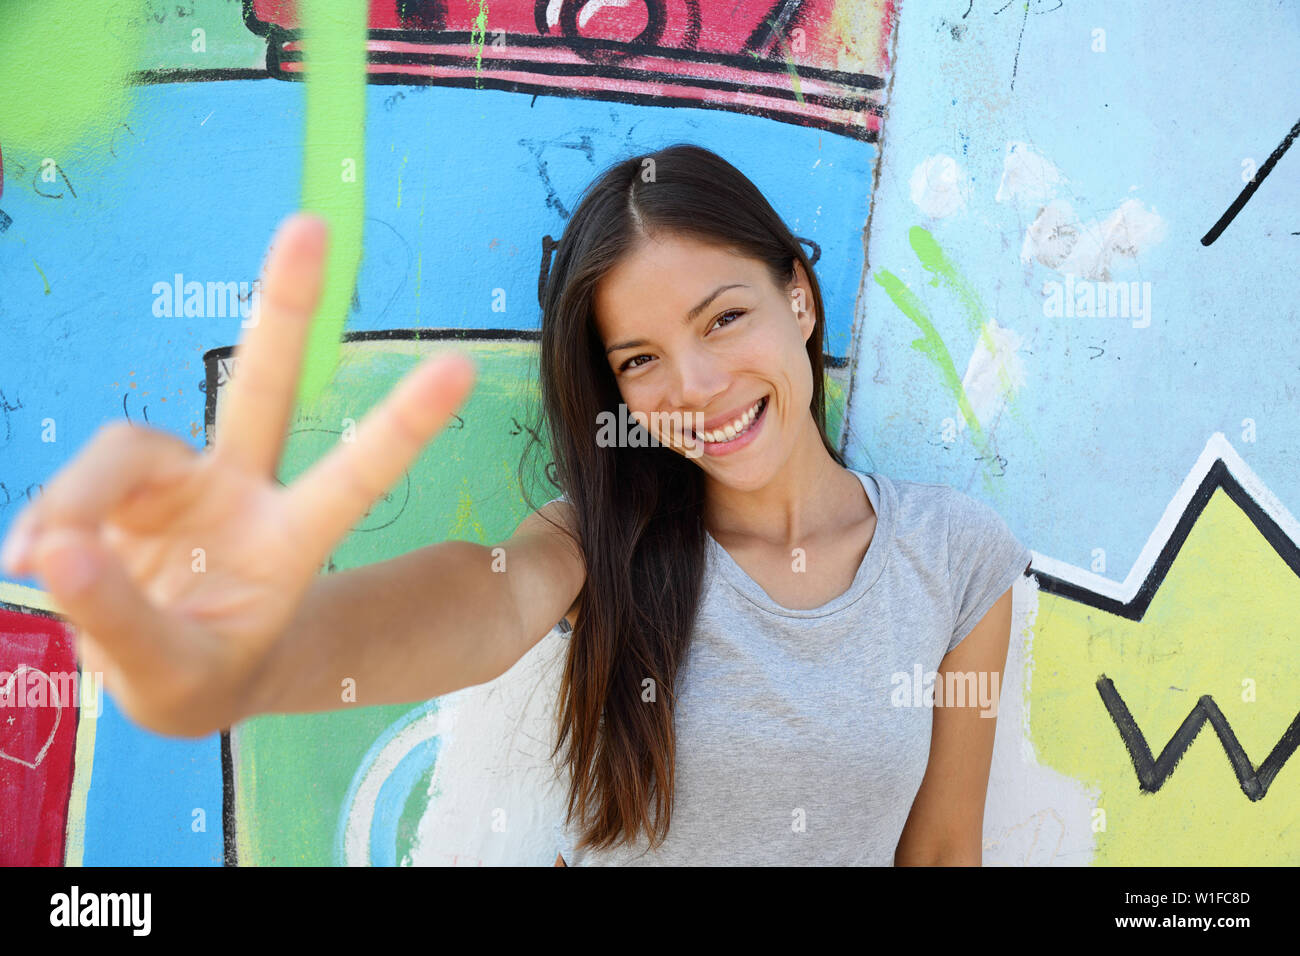 Urban young girl showing v peace sign in city. Cool Asian woman leaning on graffiti background at the Berlin wall, Germany. Modern portrait. Stock Photo